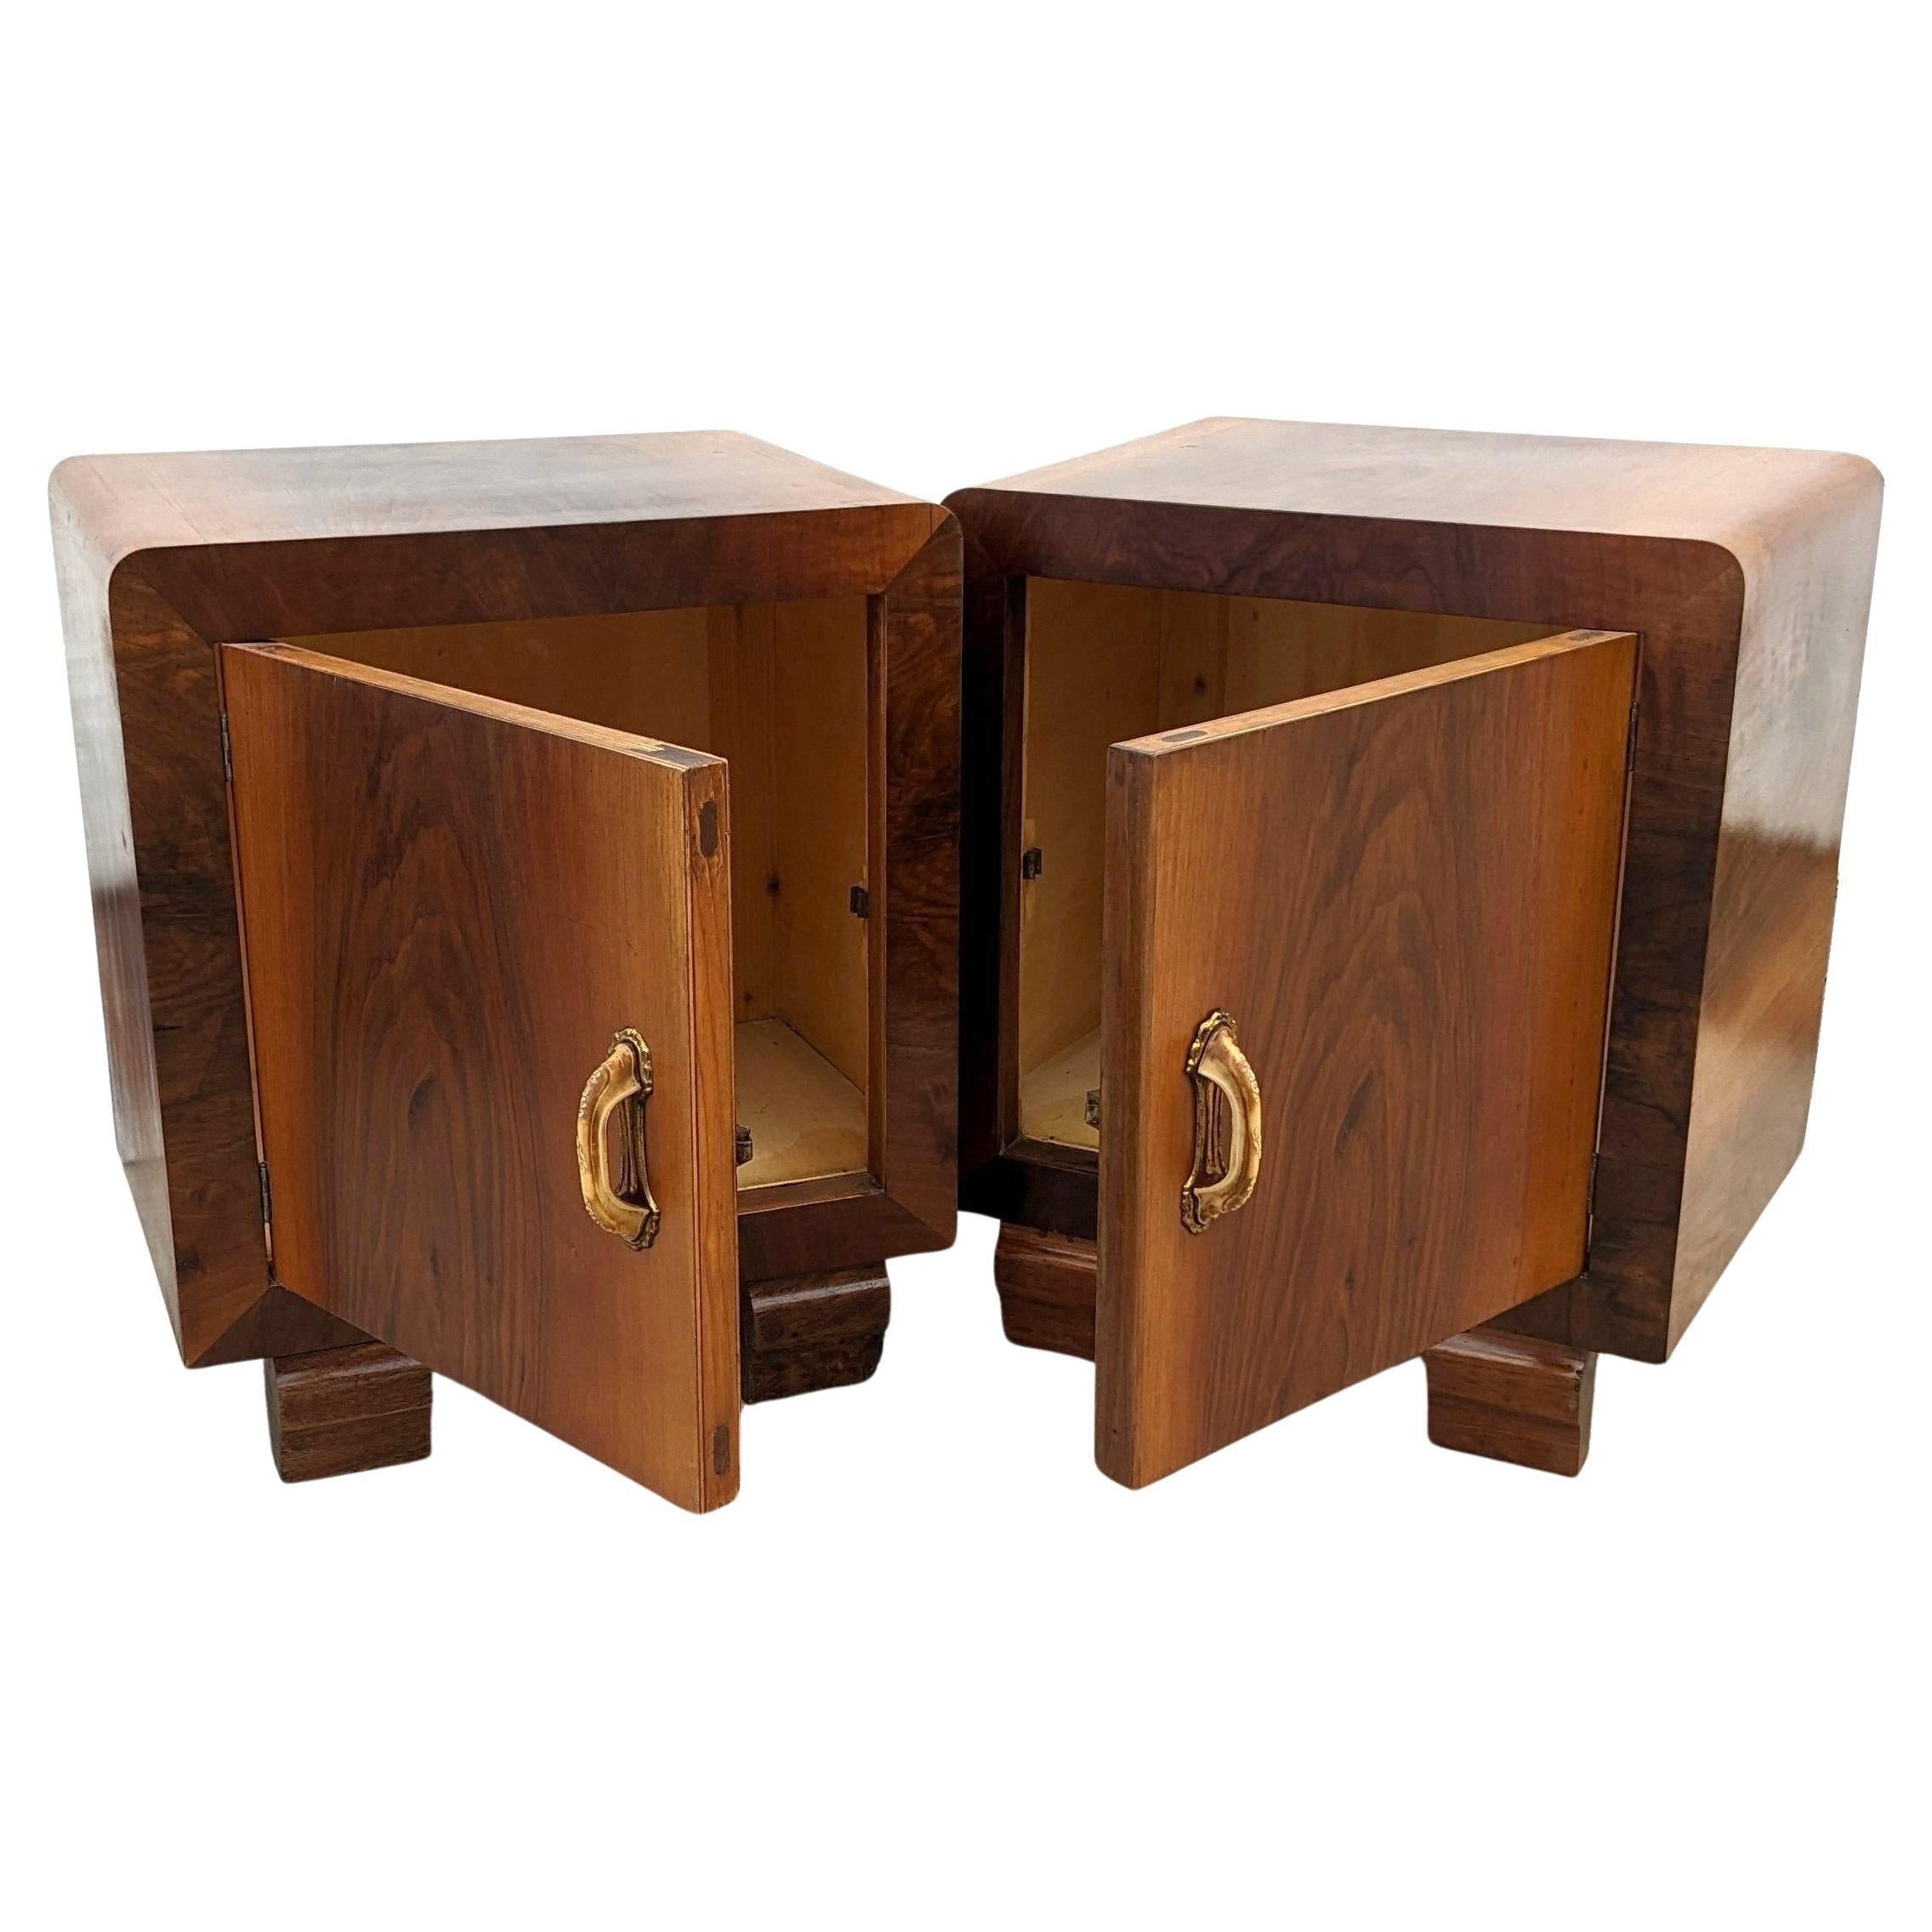 Art Deco Modernist Pair Matching of Italian Bedside Table Nightstands, c1930 For Sale 1